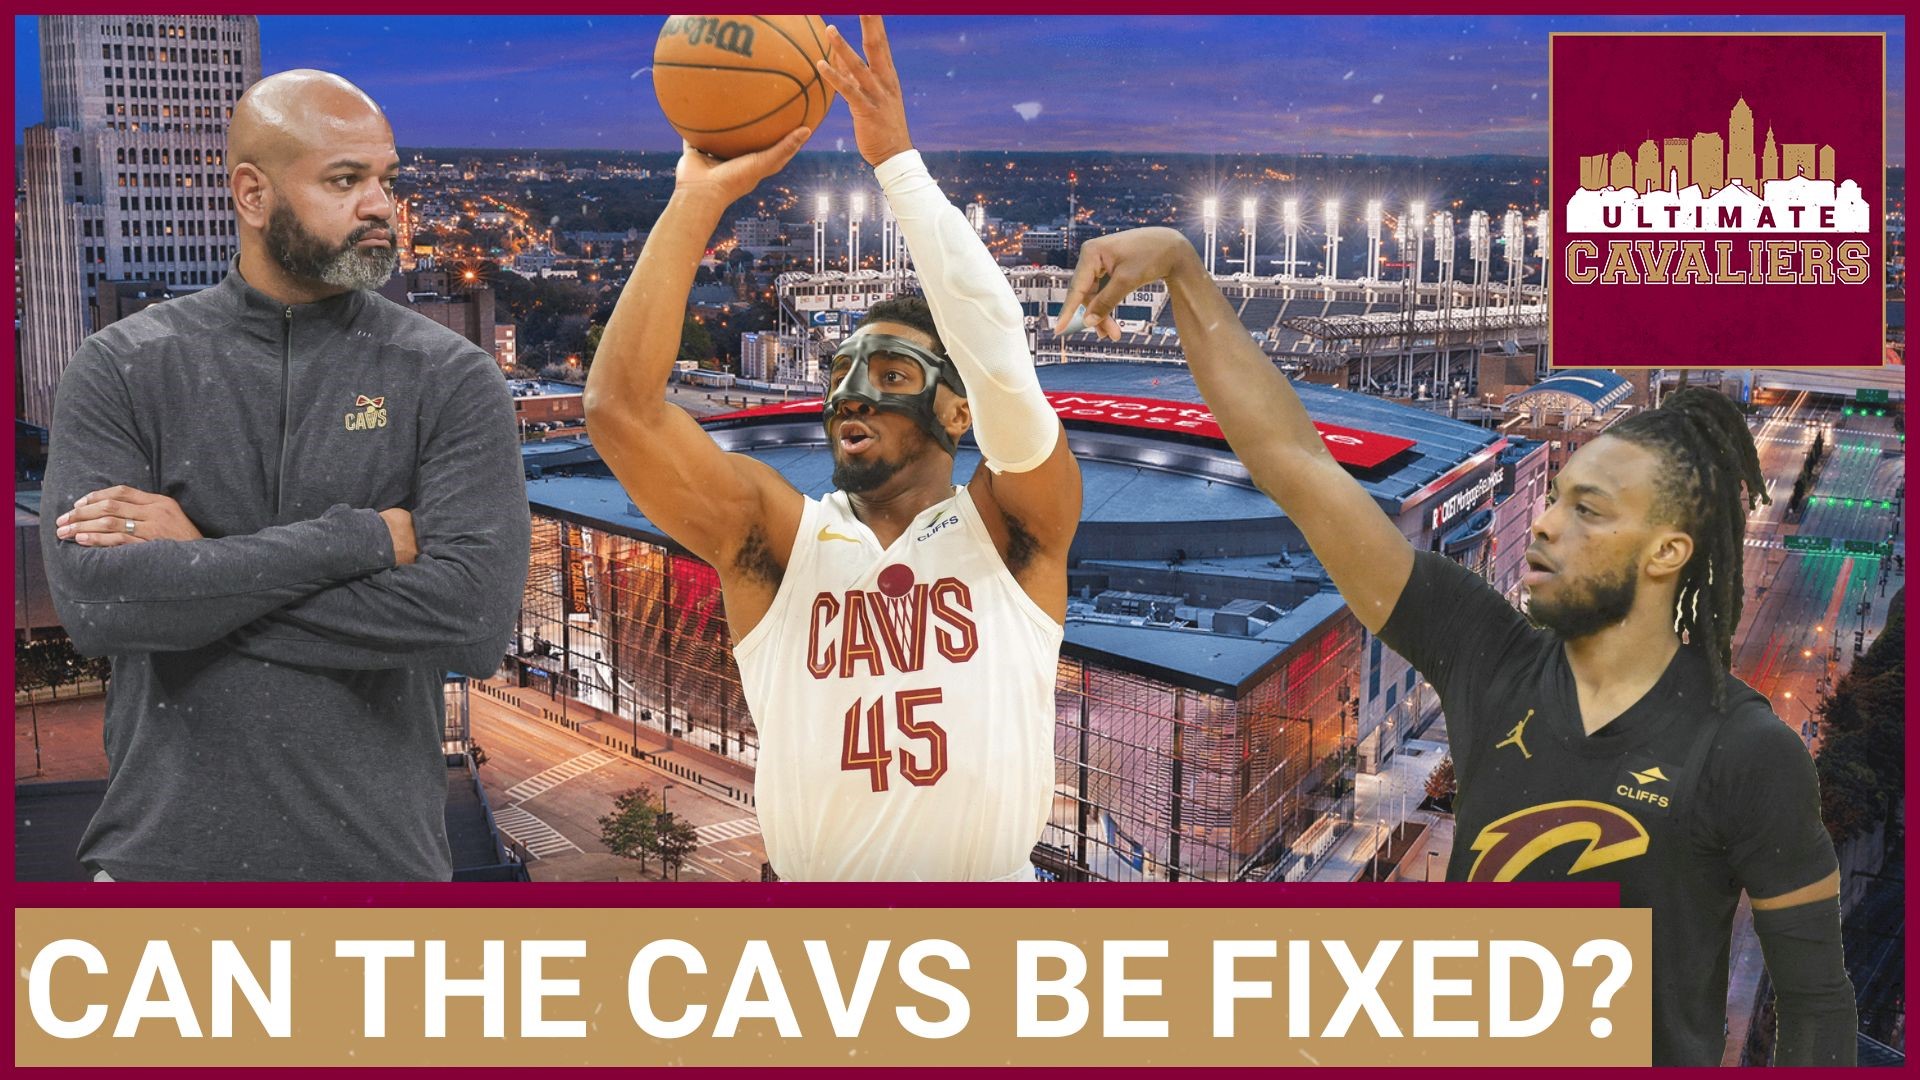 The Cavs are limping to the playoffs right now but not all is lost for this young team. Here's how to fix the issues.